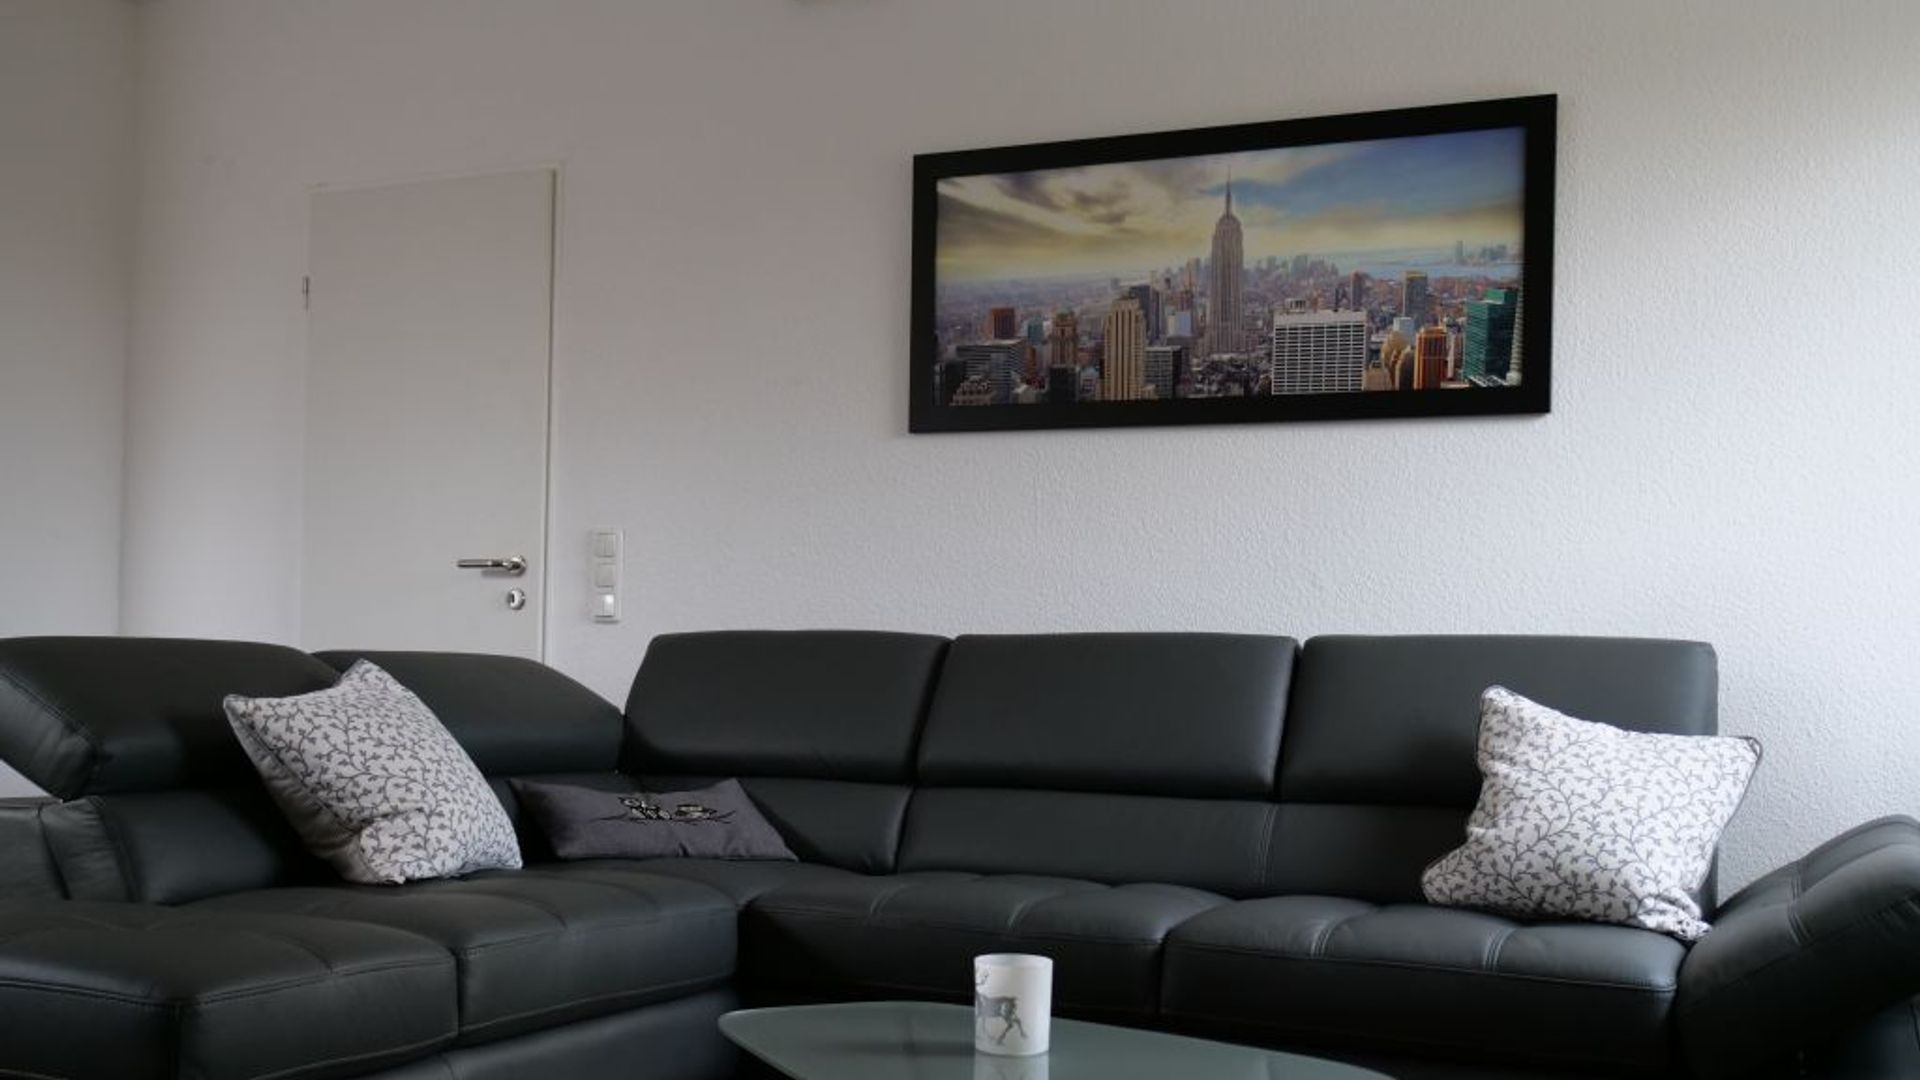 1 Bedroom Apartment At Richtericher Strasse 44 52072 Aachen Germany 6813679 Rentberry